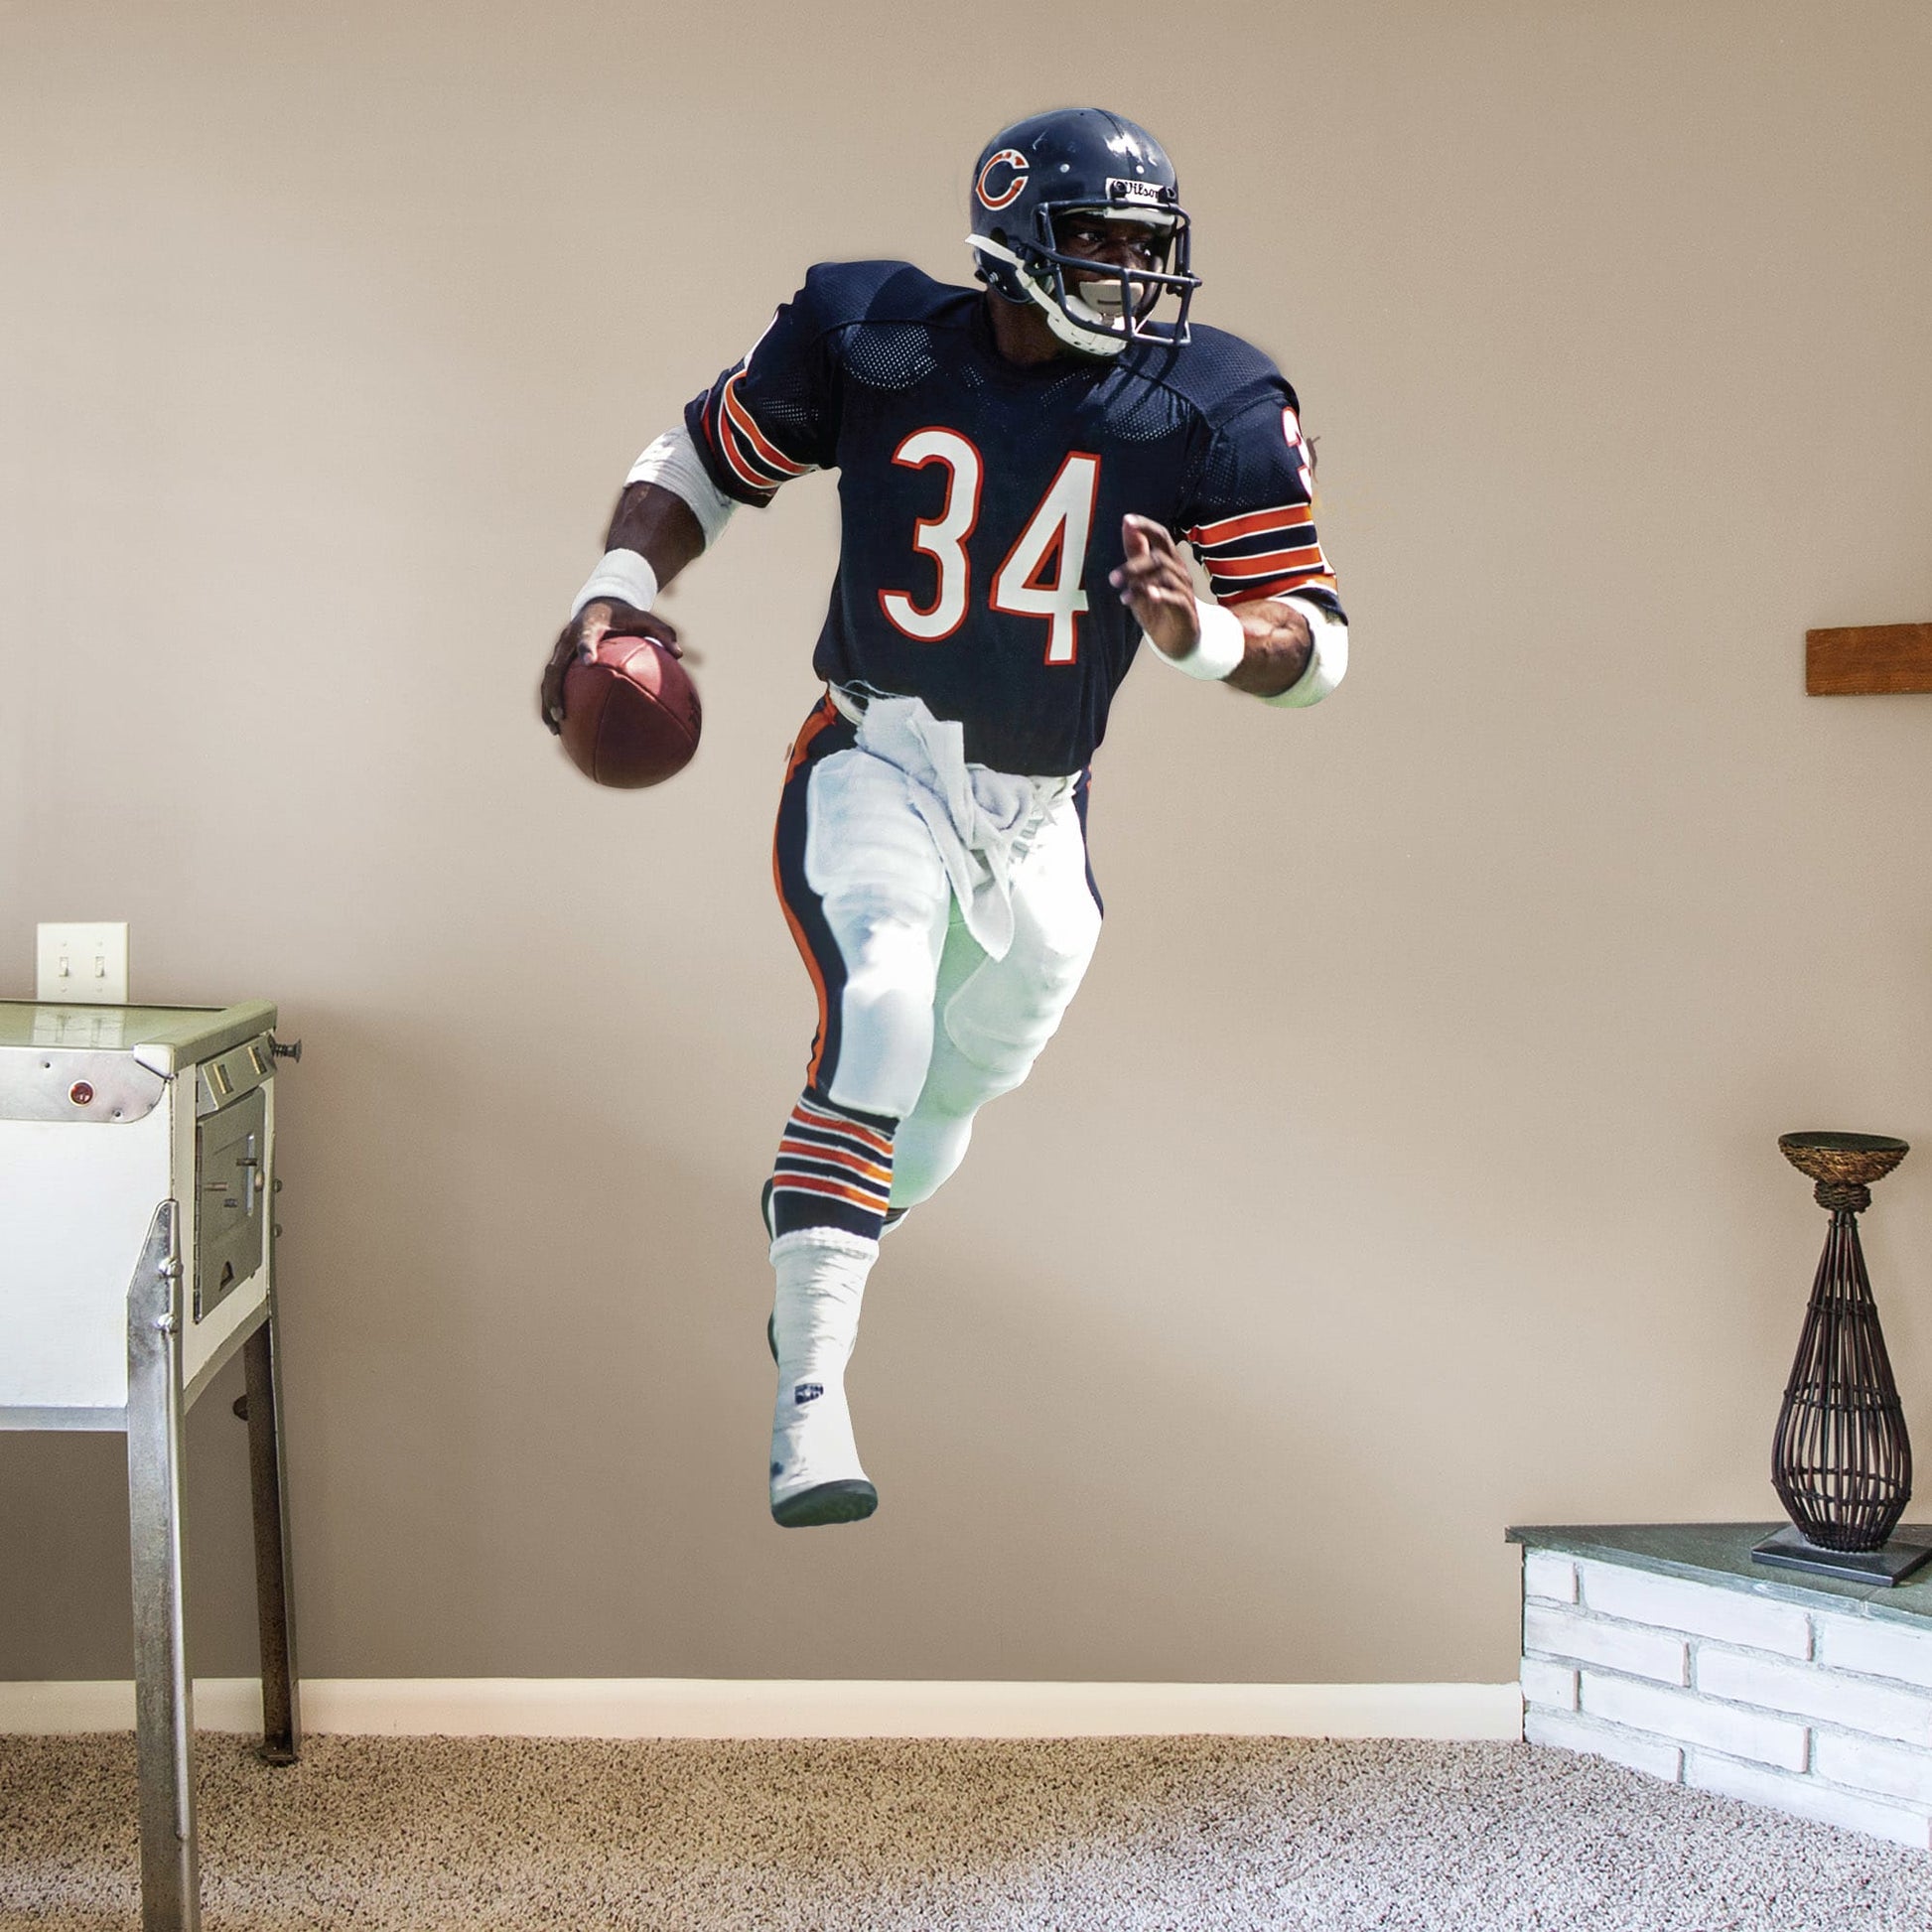 Life-Size Athlete + 2 Decals (44"W x 77"H) They called him Sweetness, a player whose heart was as big as his talent. A 9-time Pro Bowler and 1985 Super Bowl champion, Walter Payton widely is regarded as one of the greatest running backs of all time. Now fans of Da Bears can honor the late Hall of Famer with a removable wall decal set. Perfect for a bedroom or bonus room, the heavy-duty vinyl decals are easy to attach and remove. Bear down!